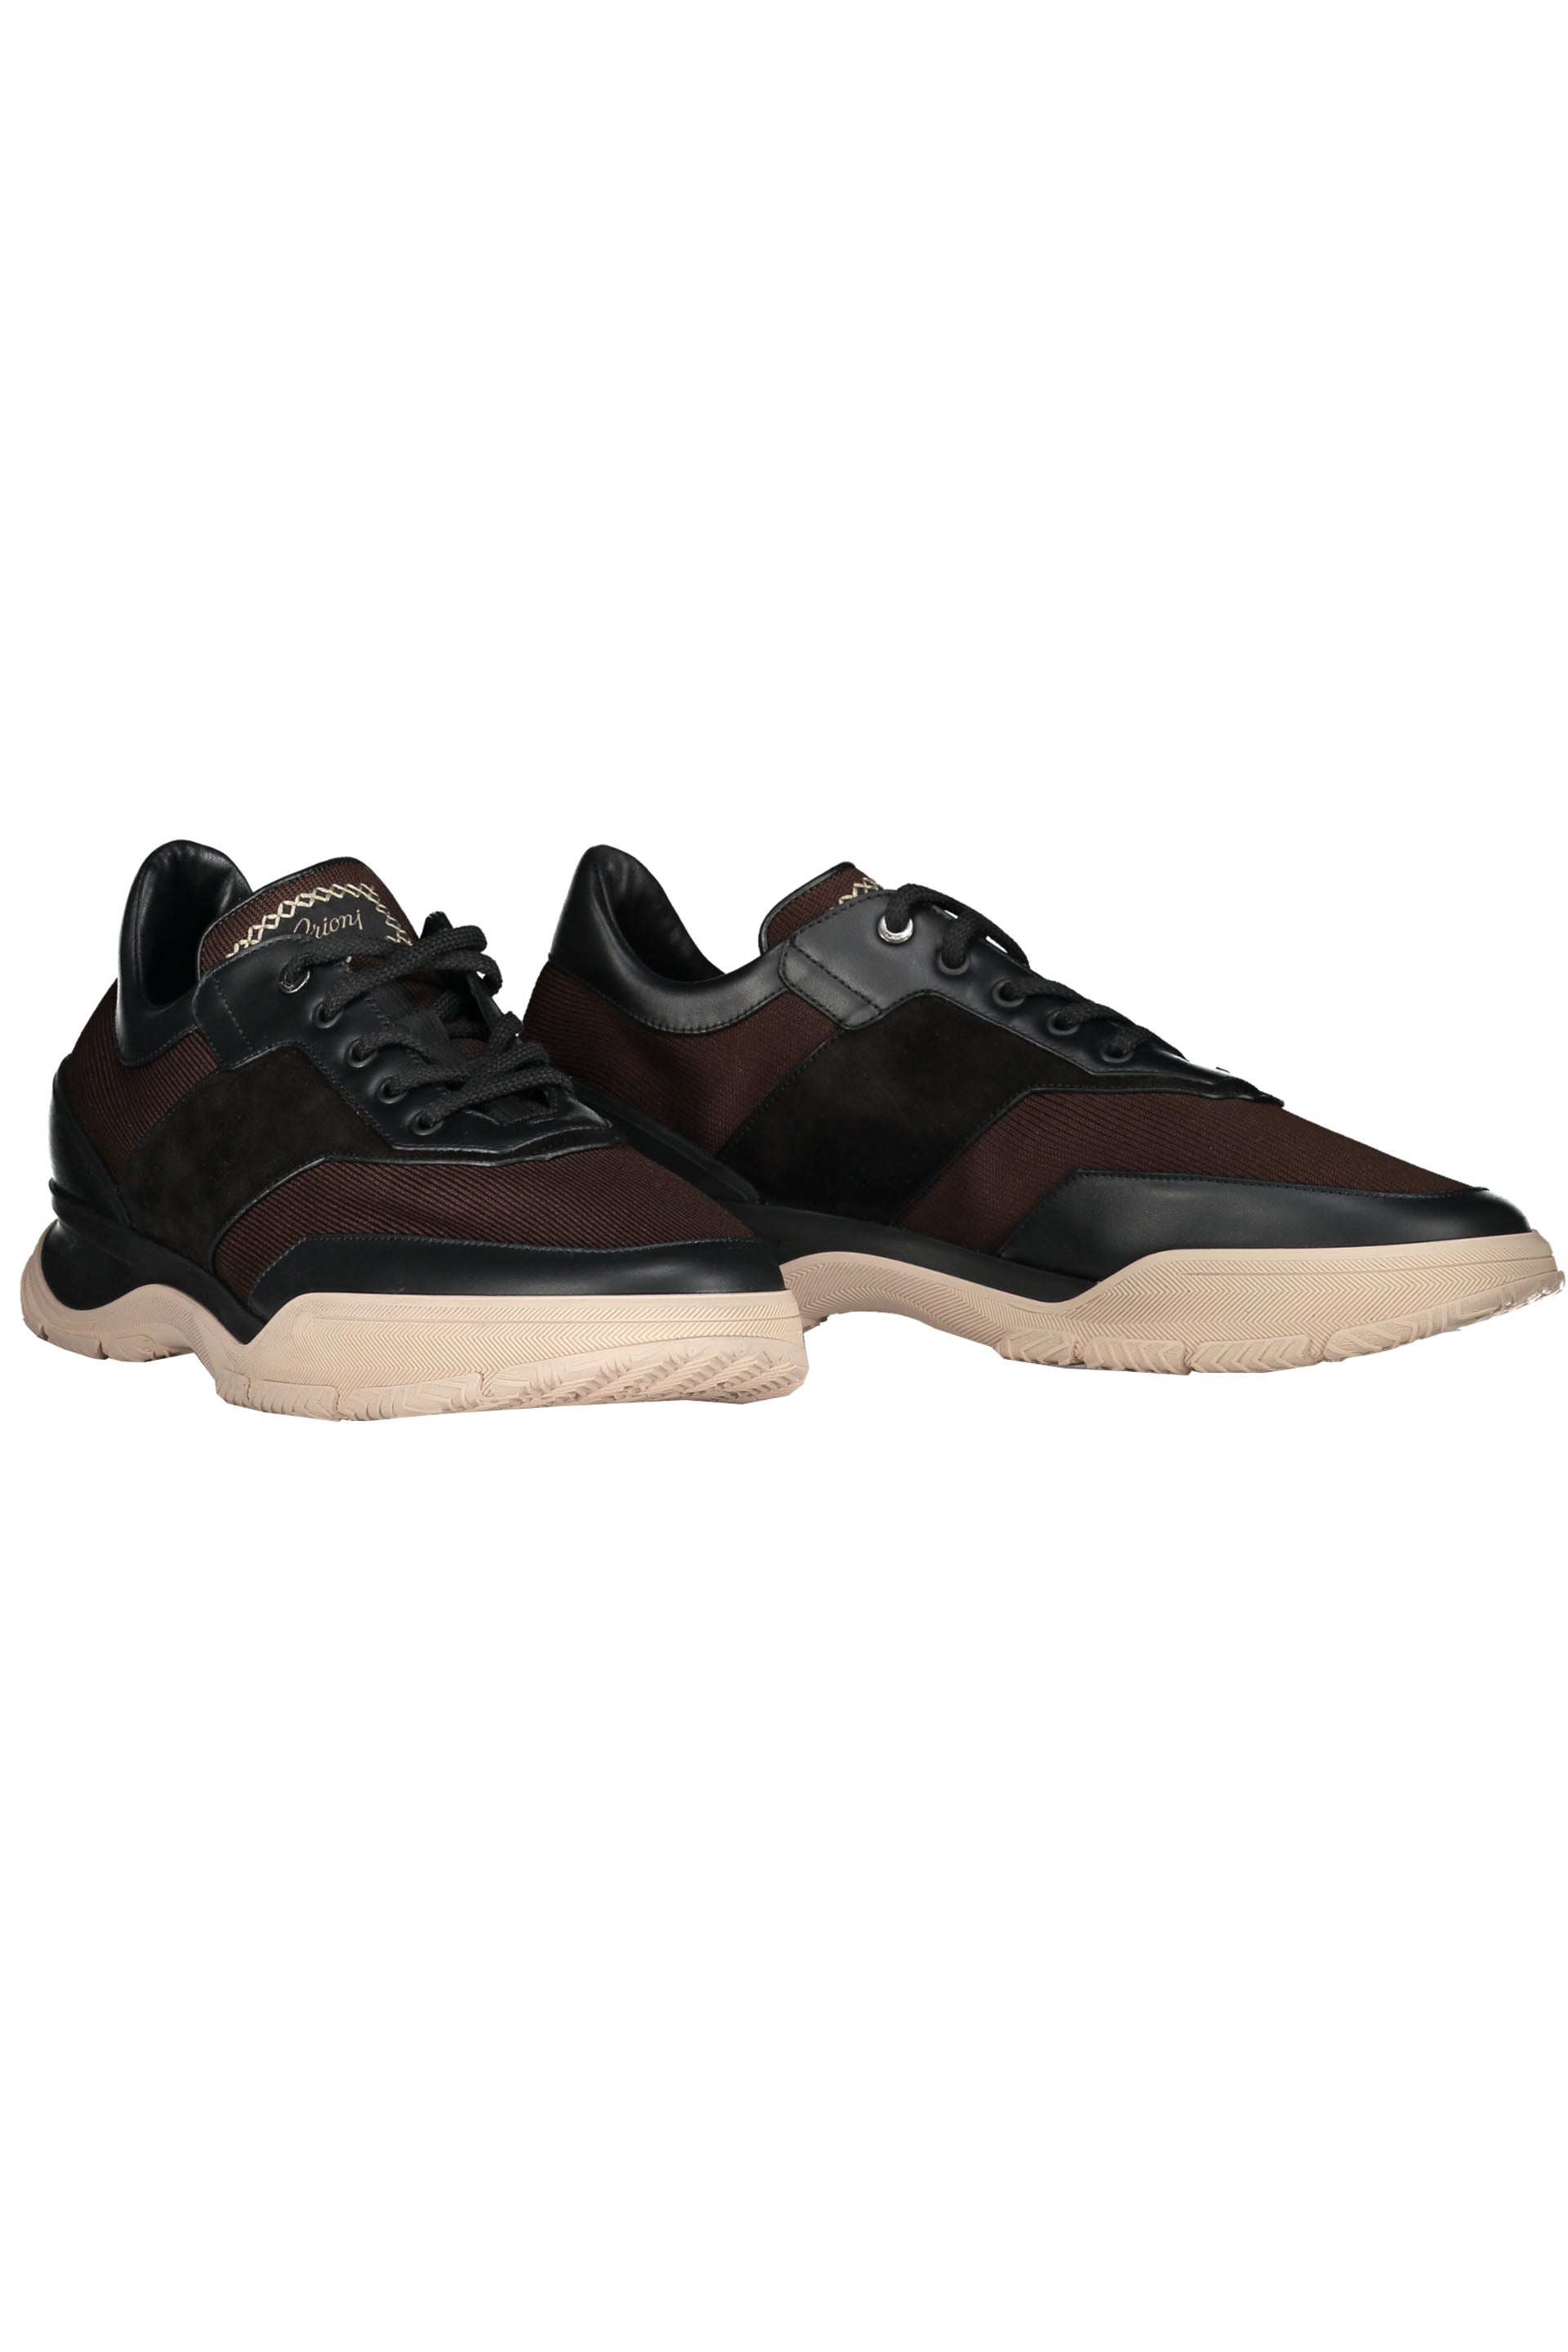 BRIONI-OUTLET-SALE-Leather-sneakers-Sneakers-ARCHIVE-COLLECTION-2_62215001-eb09-4679-a3e4-42ed1db94ce5.jpg